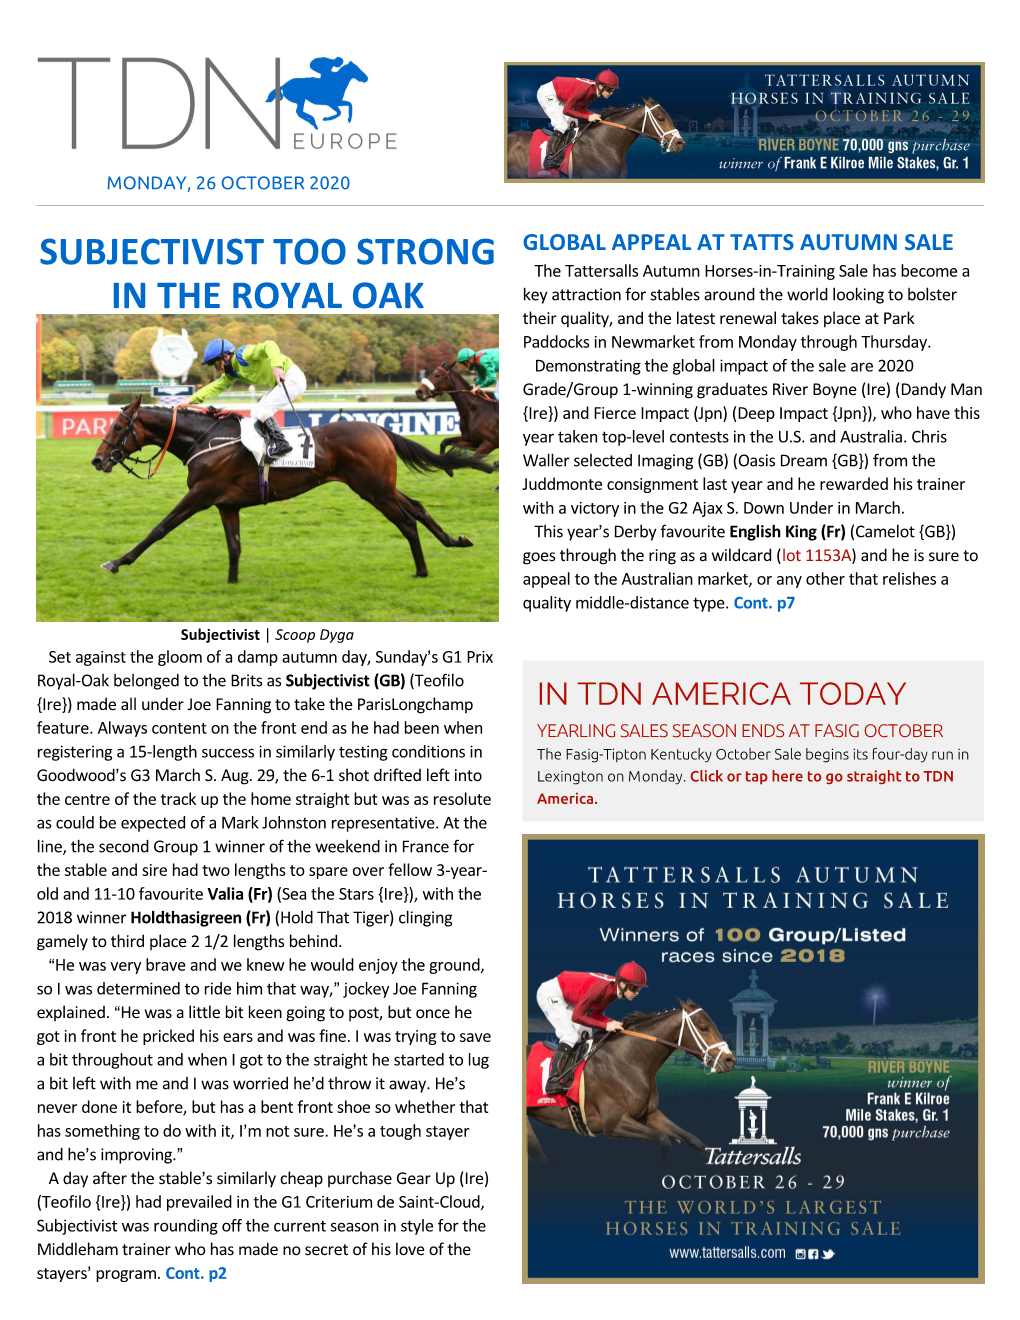 Tdn Europe • Page 2 of 13 • Thetdn.Com Monday • 26 October 2020